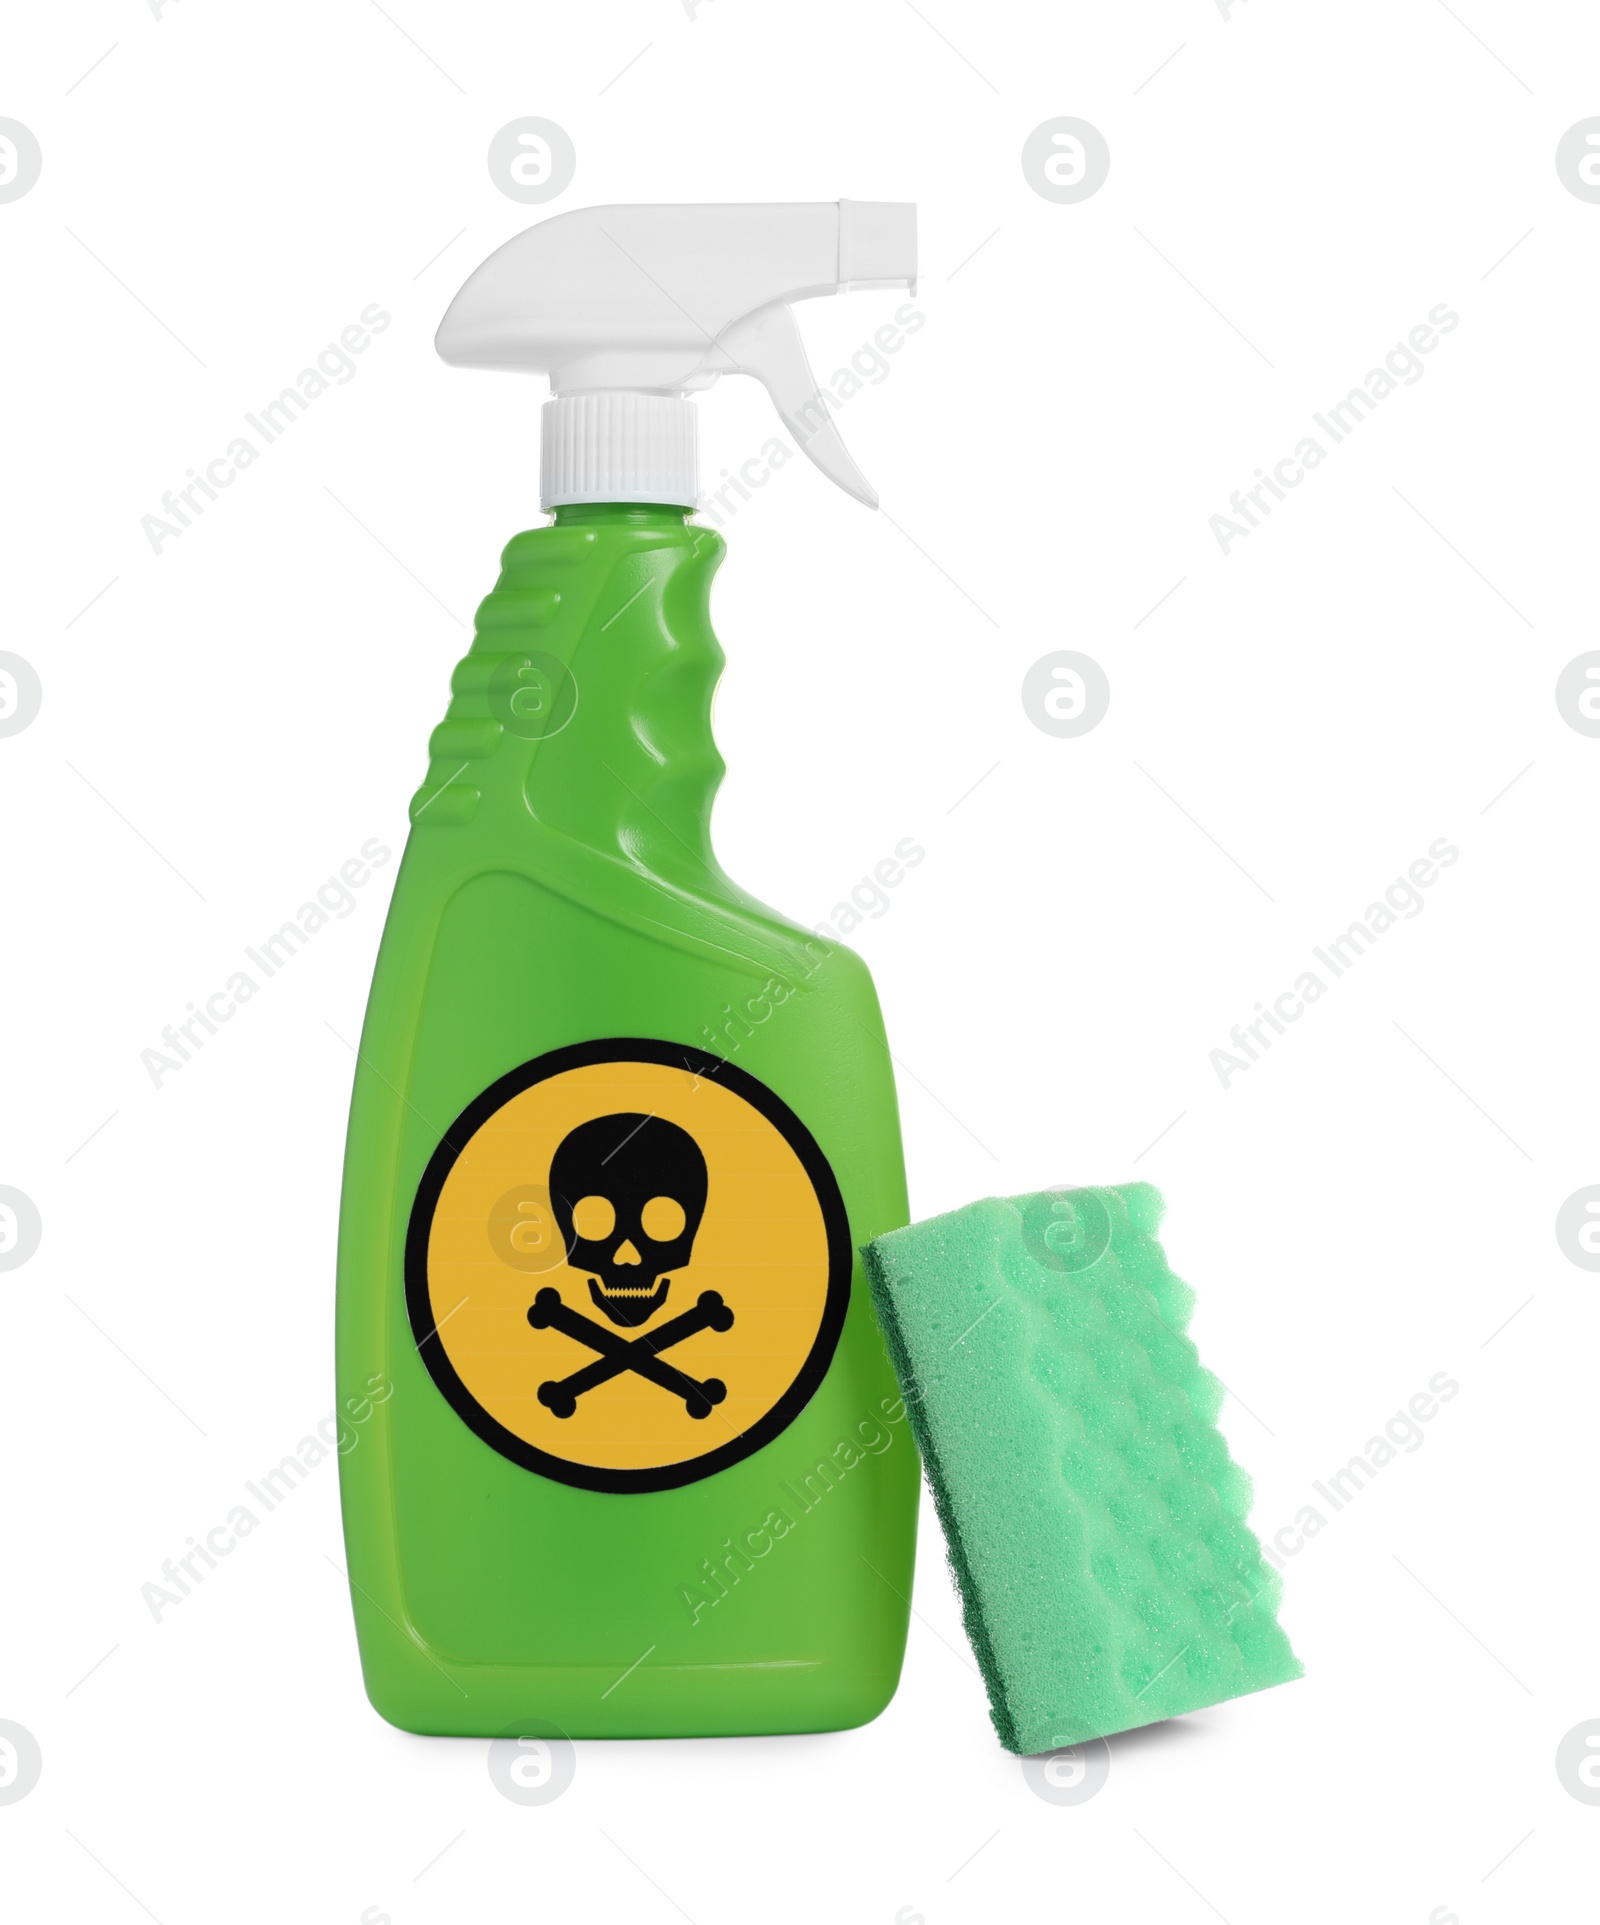 Photo of Bottle of toxic household chemical with warning sign and scouring sponge on white background